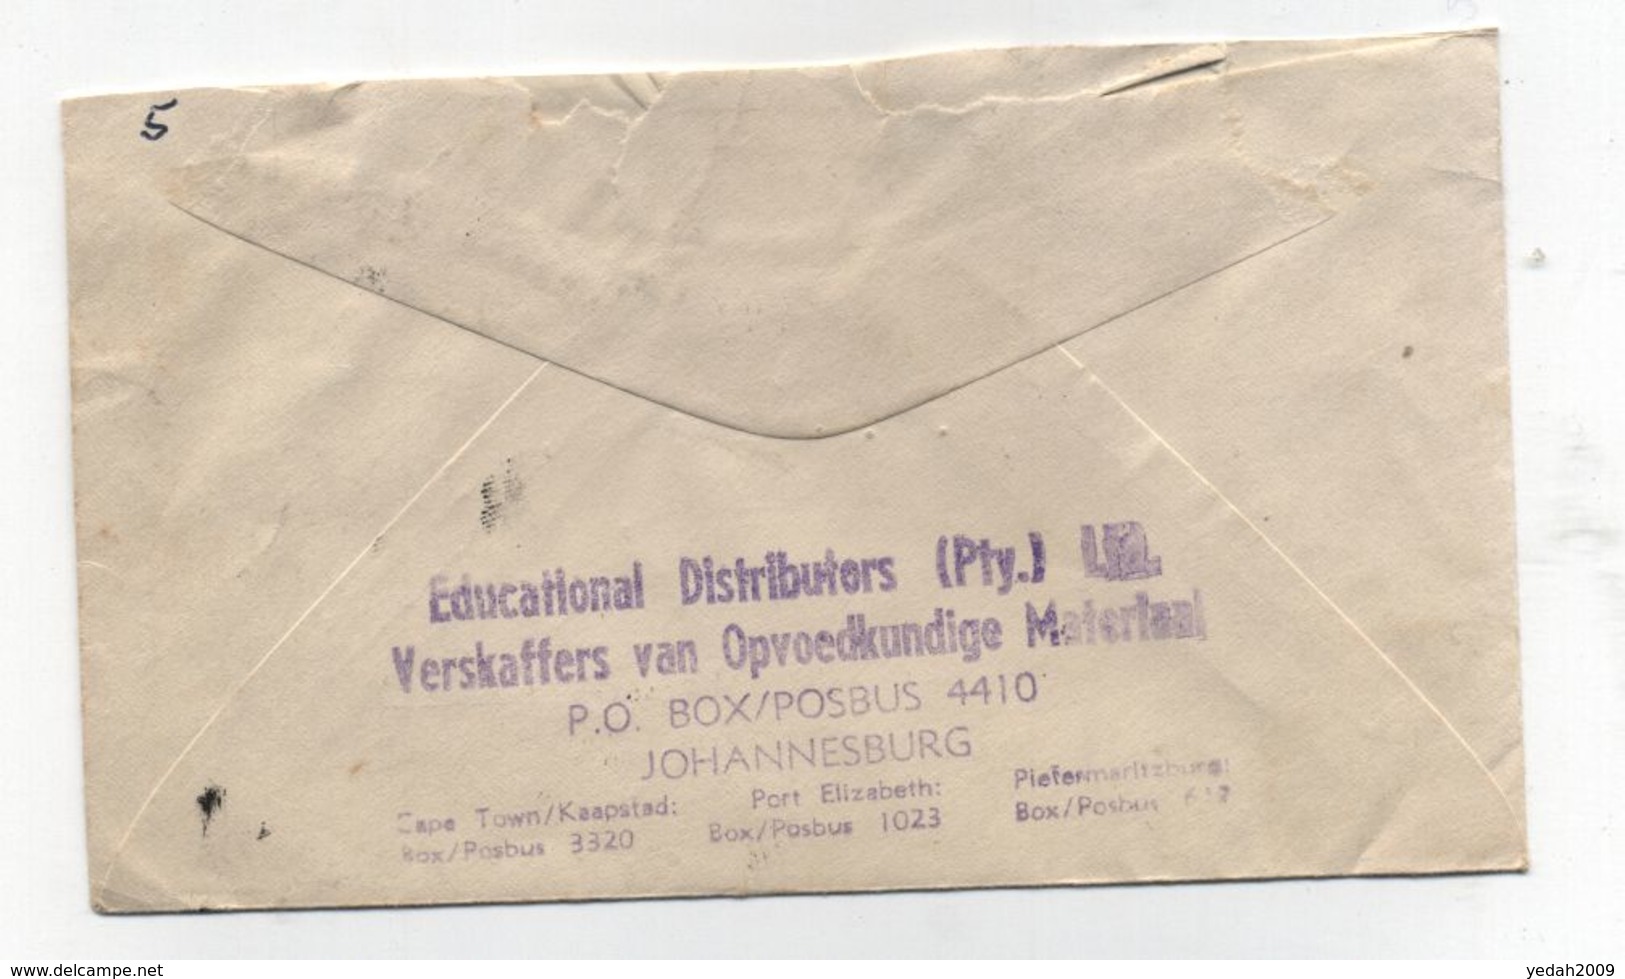 South Africa LION AIRMAIL COVER TO Germany 1960 - Posta Aerea